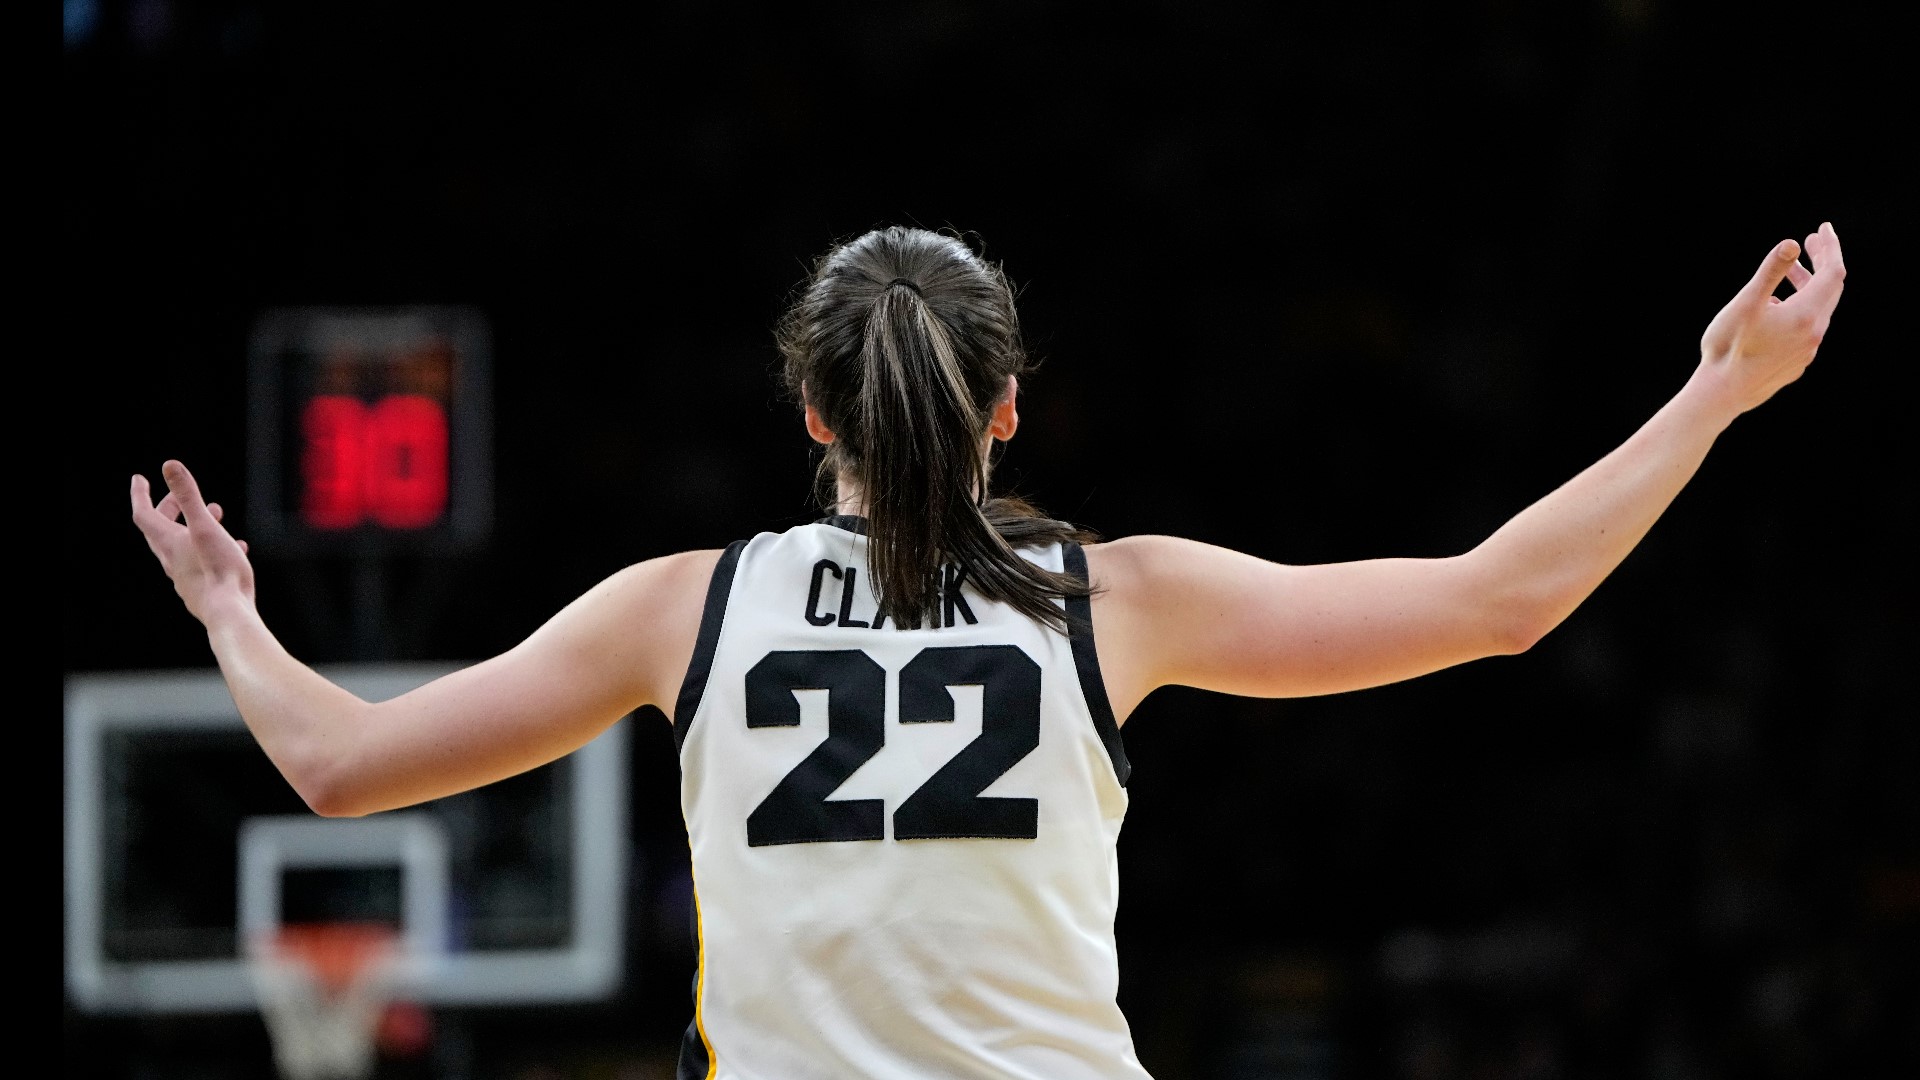 15,000+ erupted Thursday night at Carver-Hawkeye as Caitlin Clark broke the NCAA scoring record, and the applause was just as loud on social media.